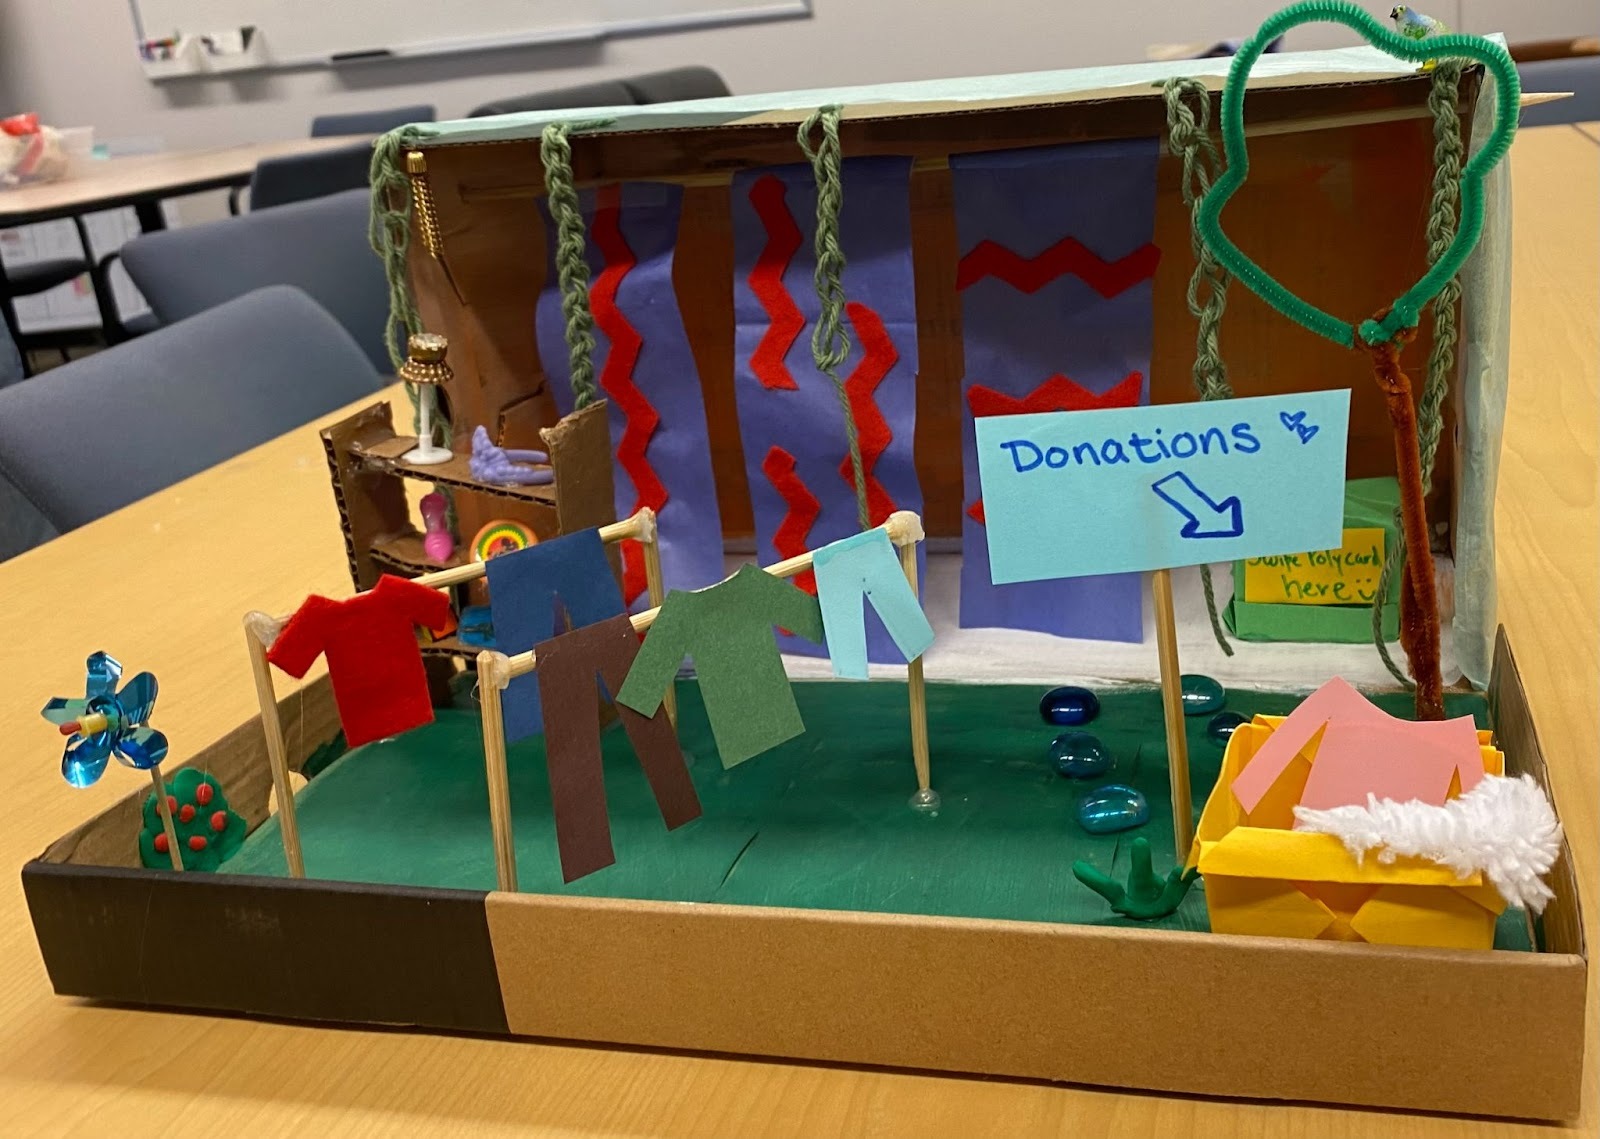 A diorama of a clothing swap showing clothes, a donation box and decorations. 